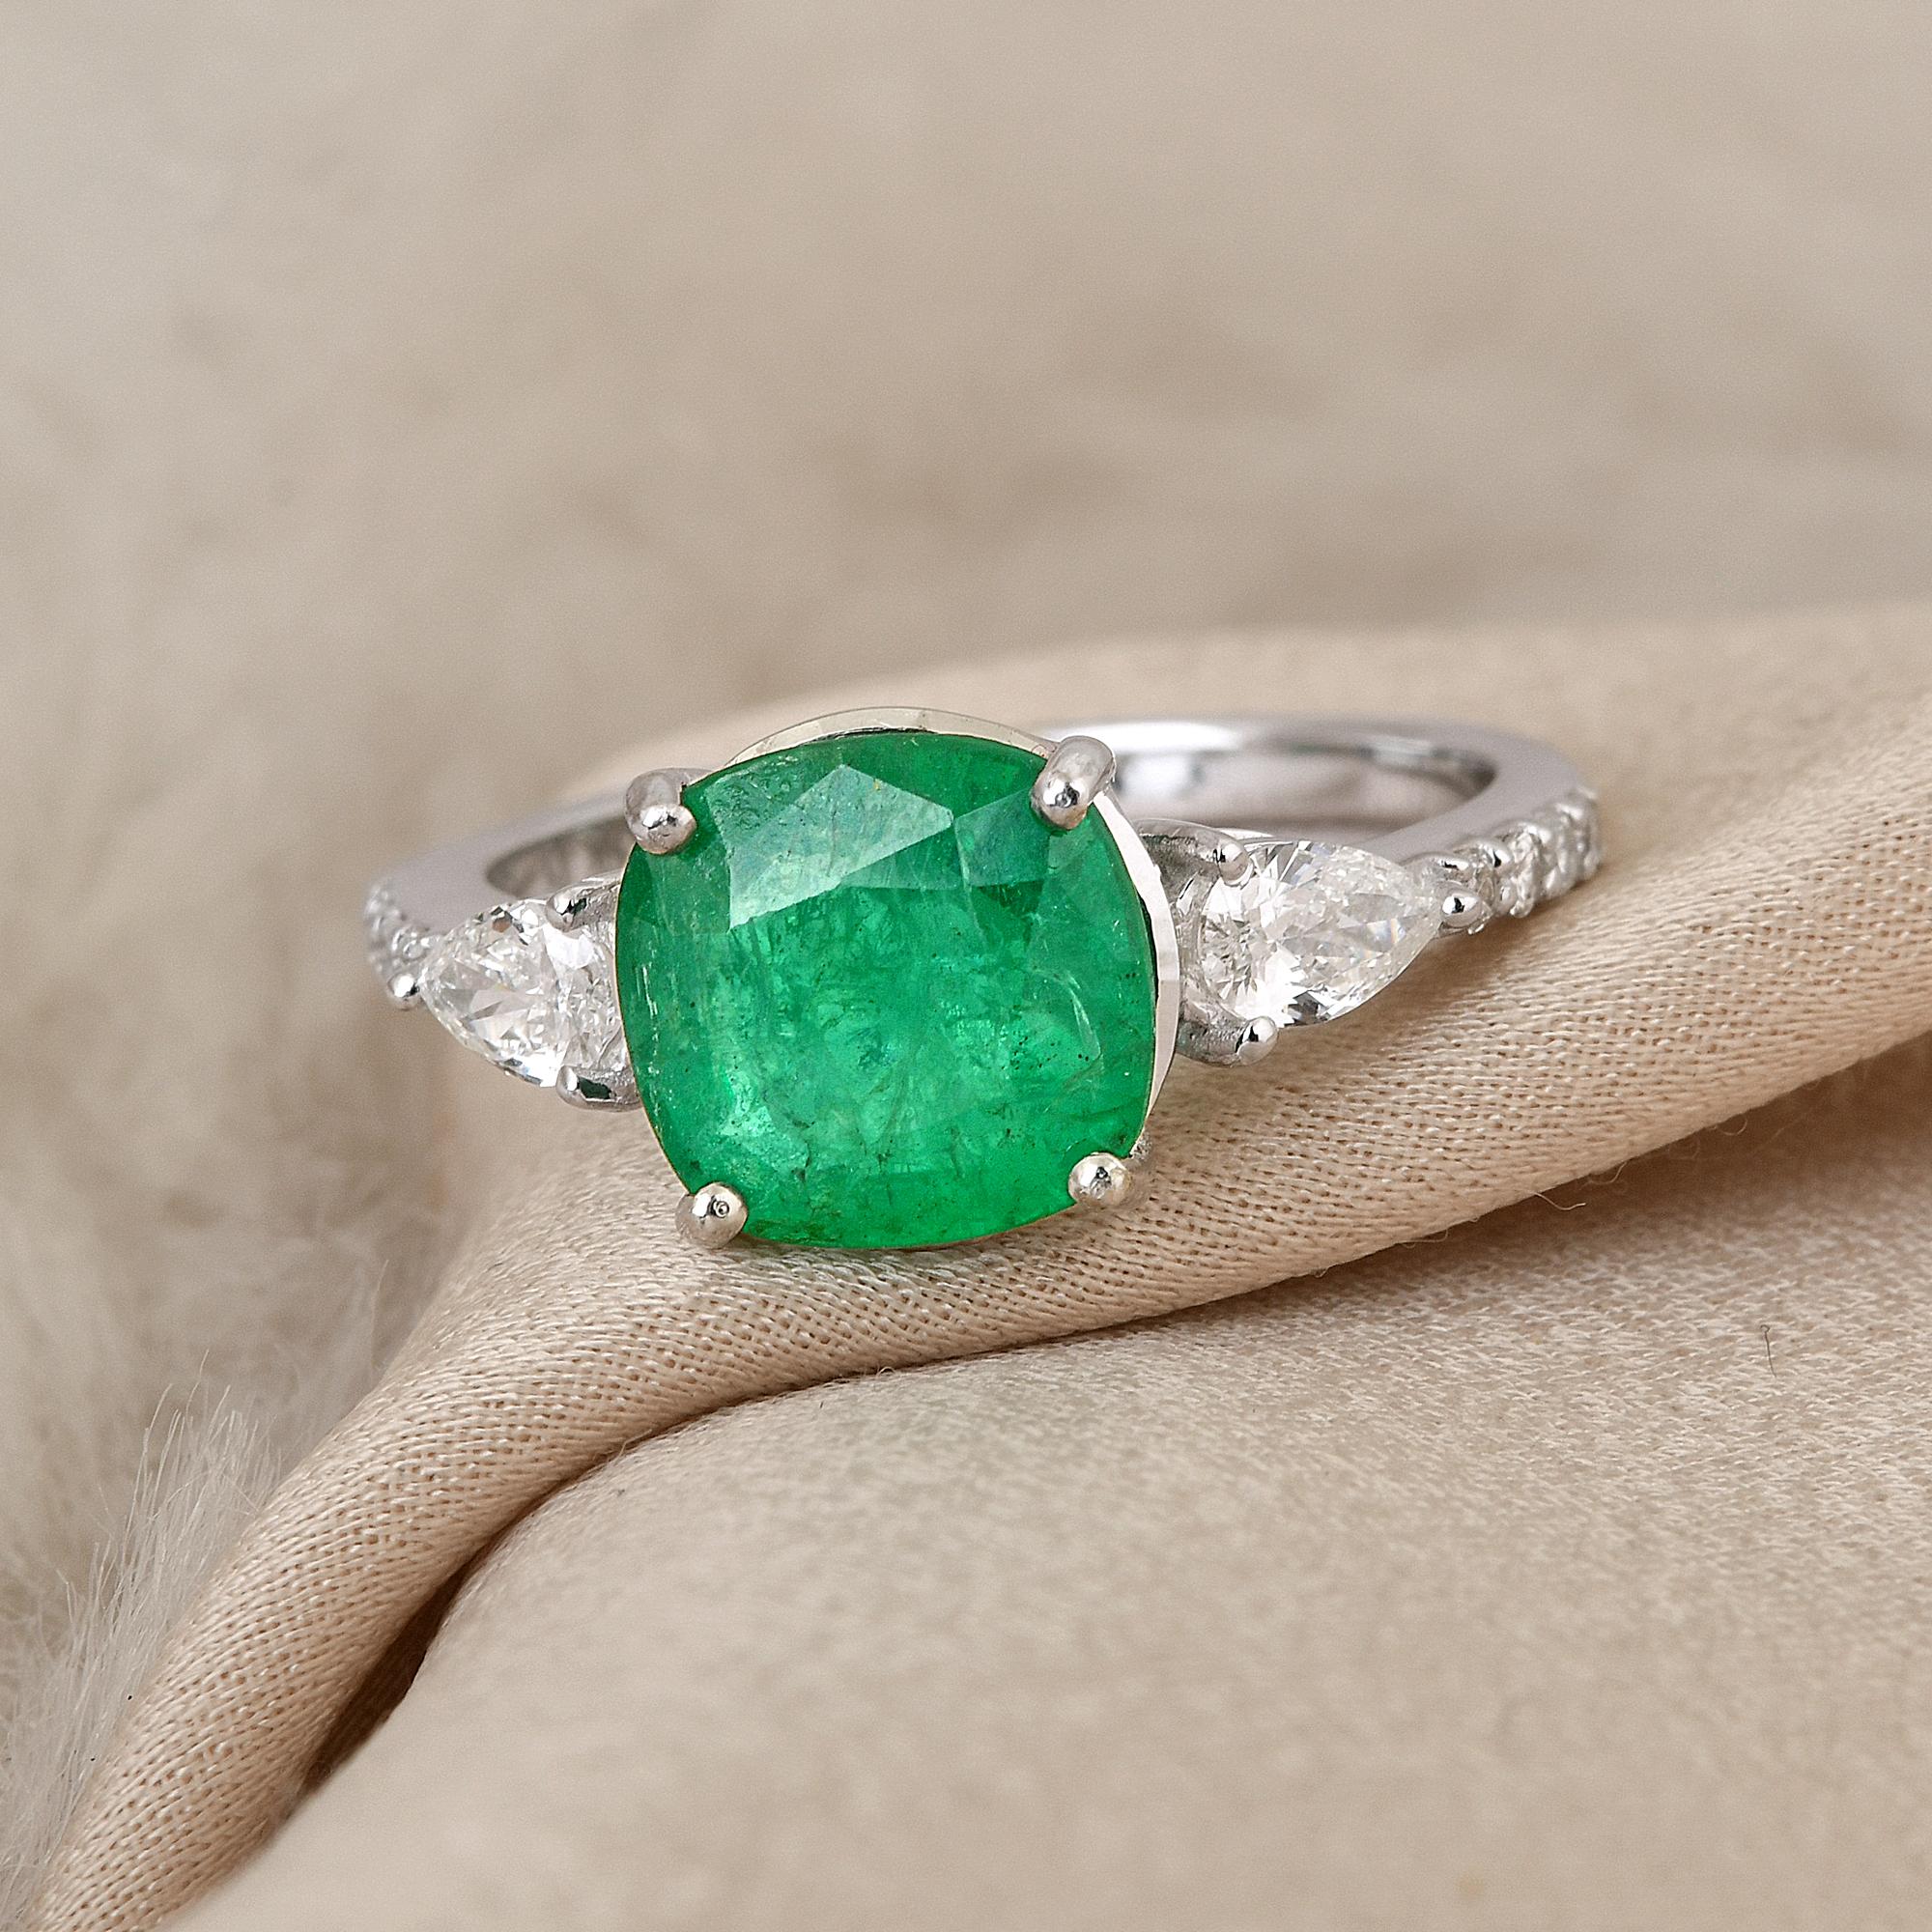 Women's Zambian Emerald Cocktail Ring Pear Diamond Solid 14k White Gold Handmade Jewelry For Sale